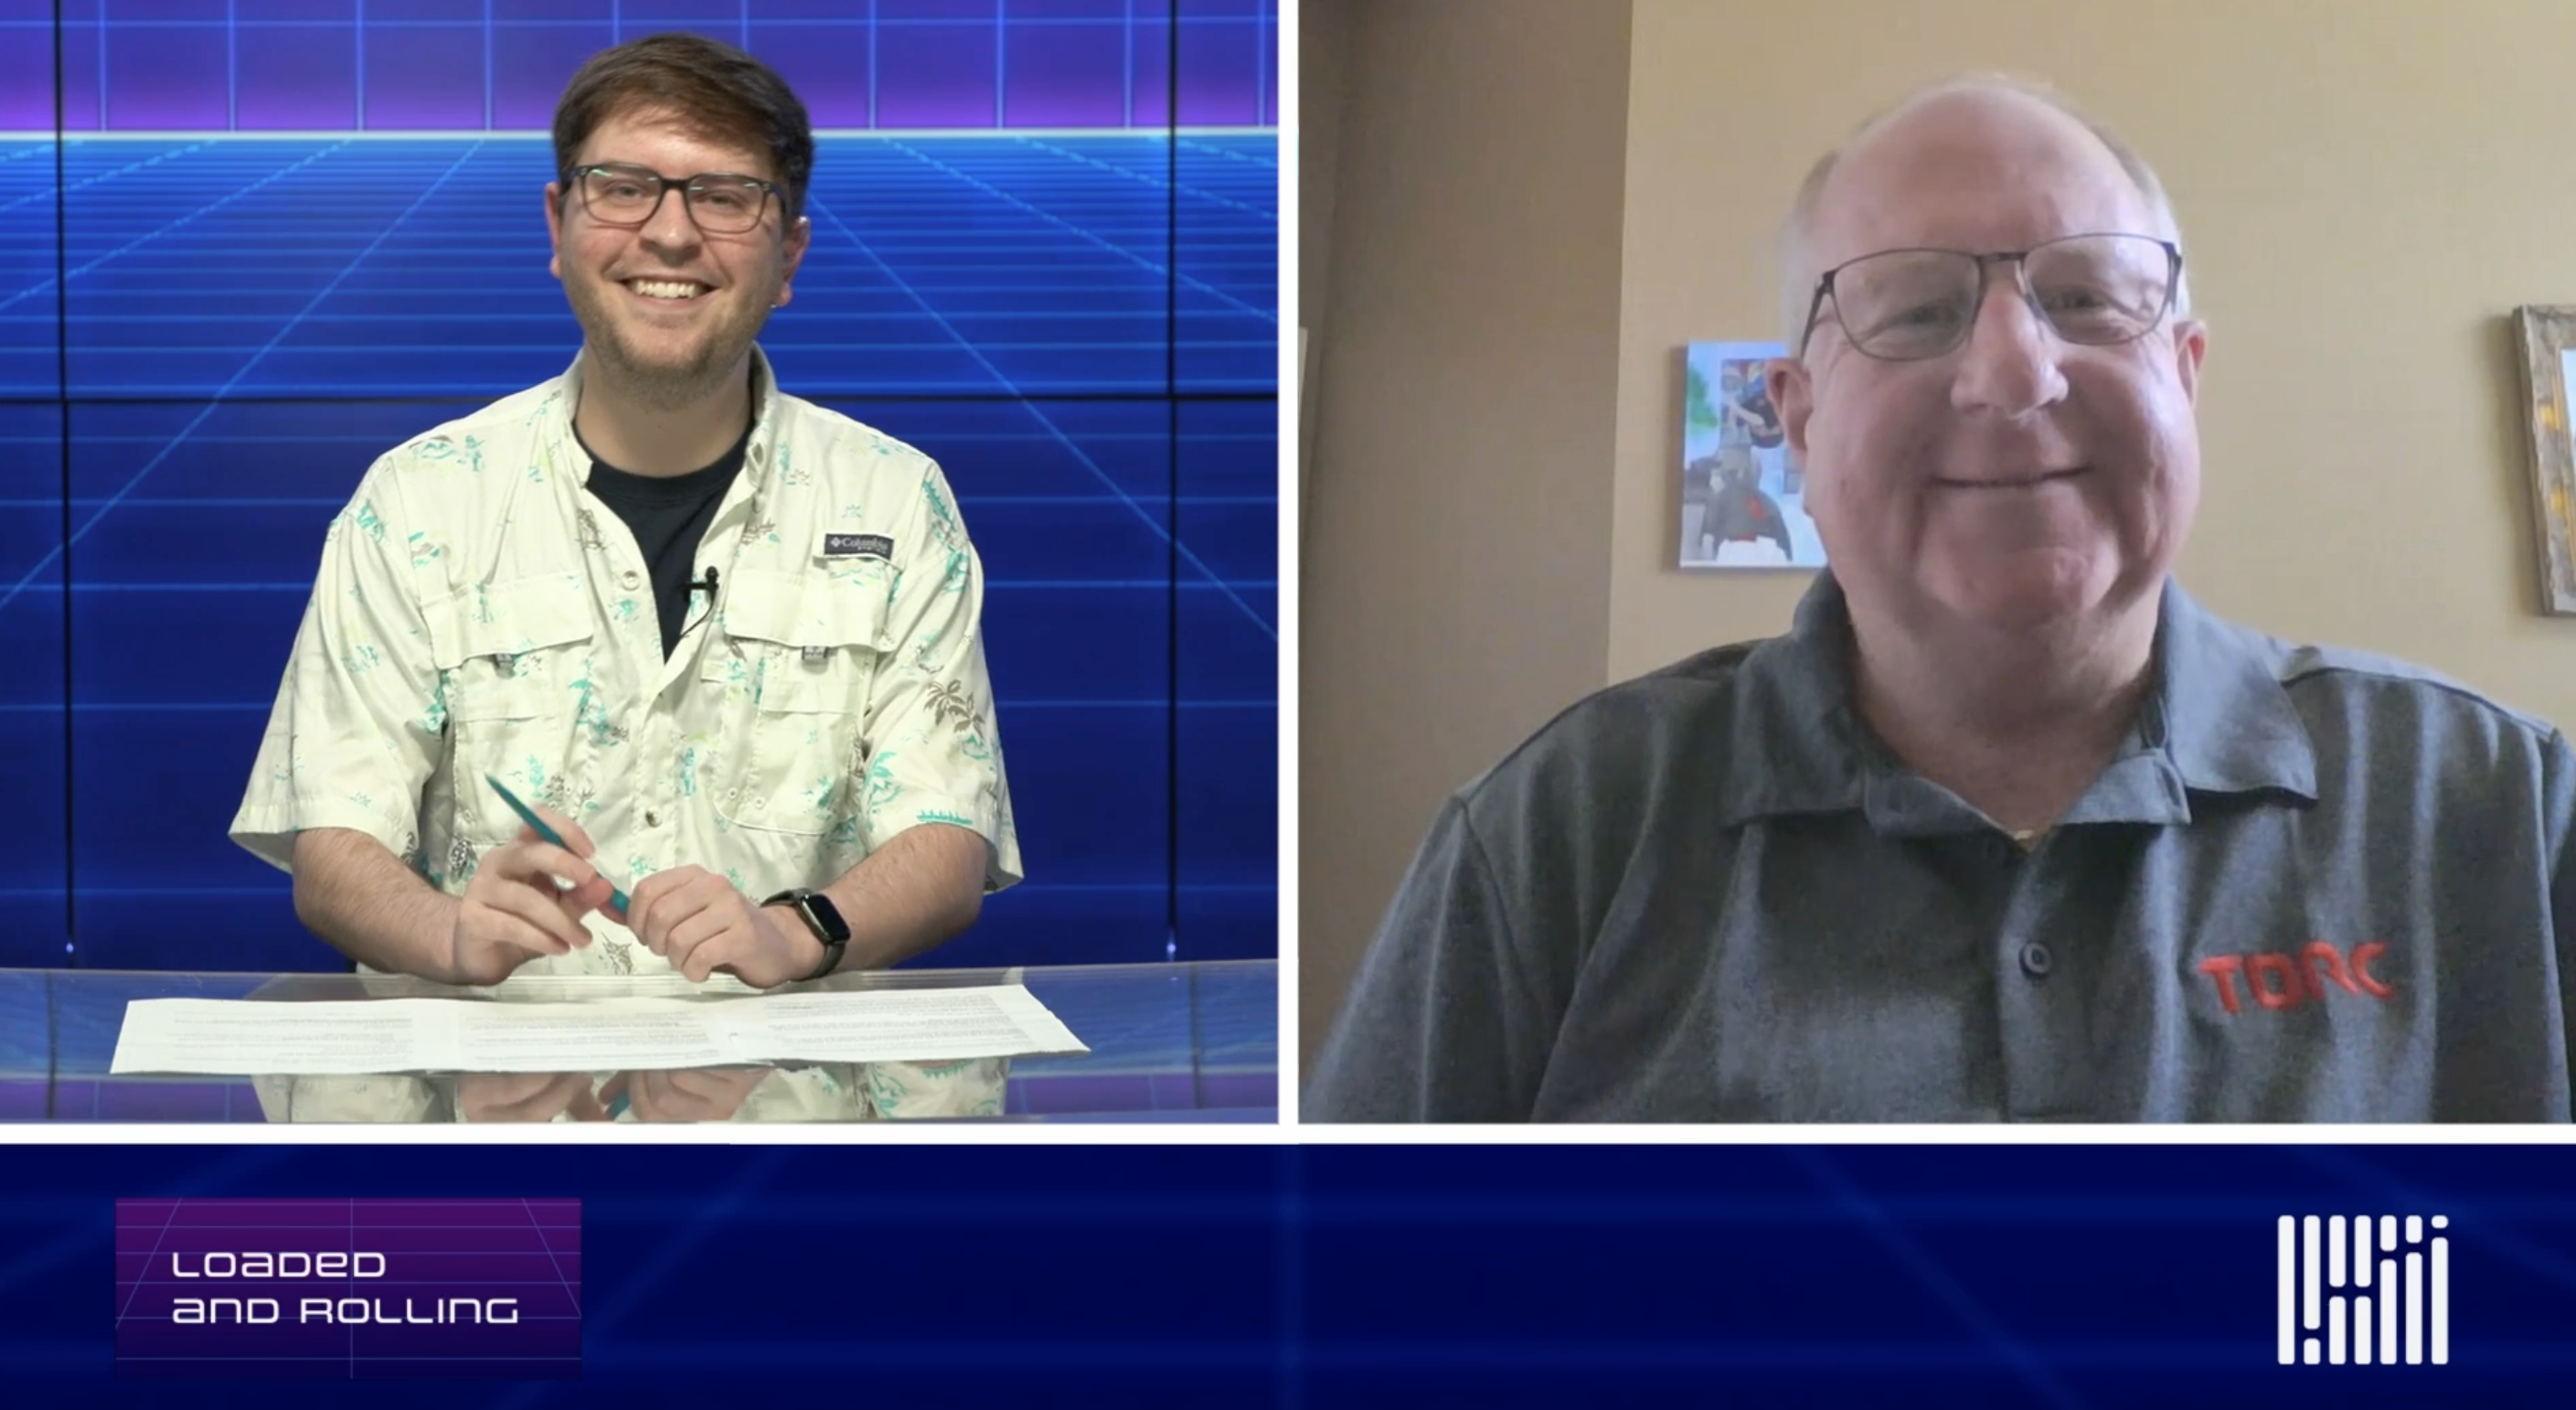 Torc's Frank Mabry and Loaded and Rolling host Thomas Wasson on a split screen, talking about autonomous hype